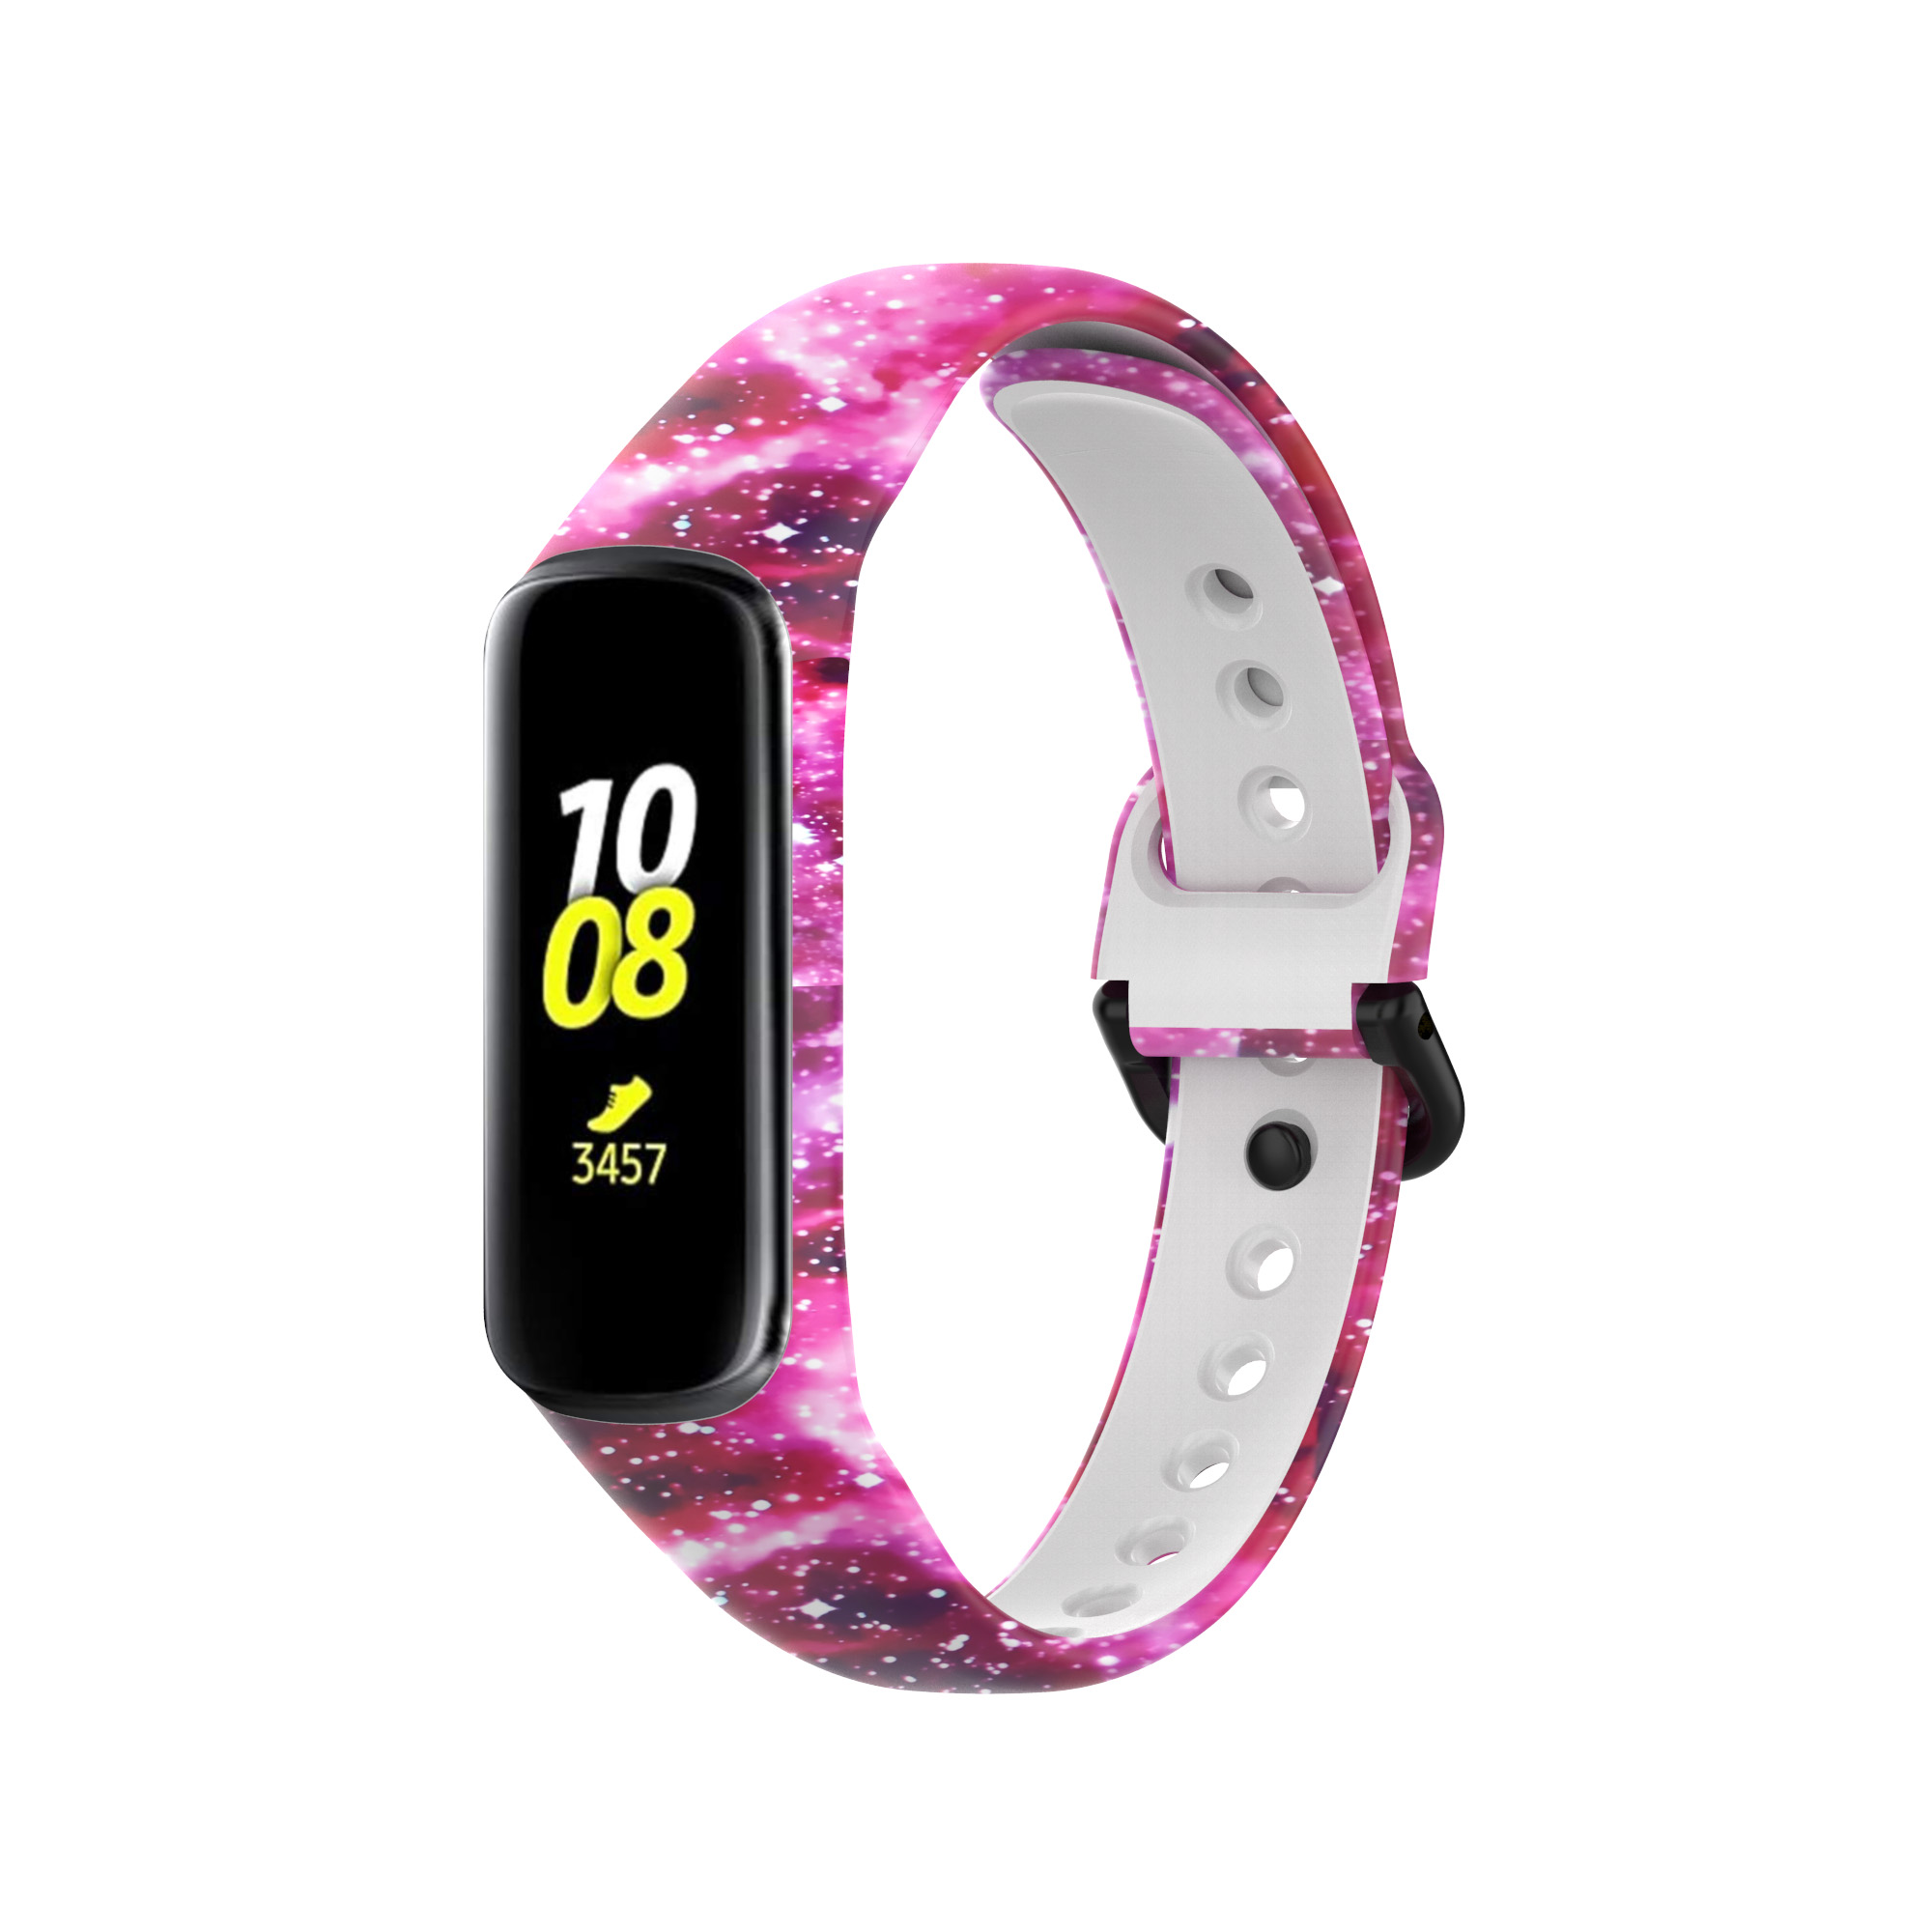 Bakeey-Printed-Pattern-Stainless-Steel-Buckle-Smart-watch-Band-Replacement-Strap-For-Samsung-Galaxy--1806217-32